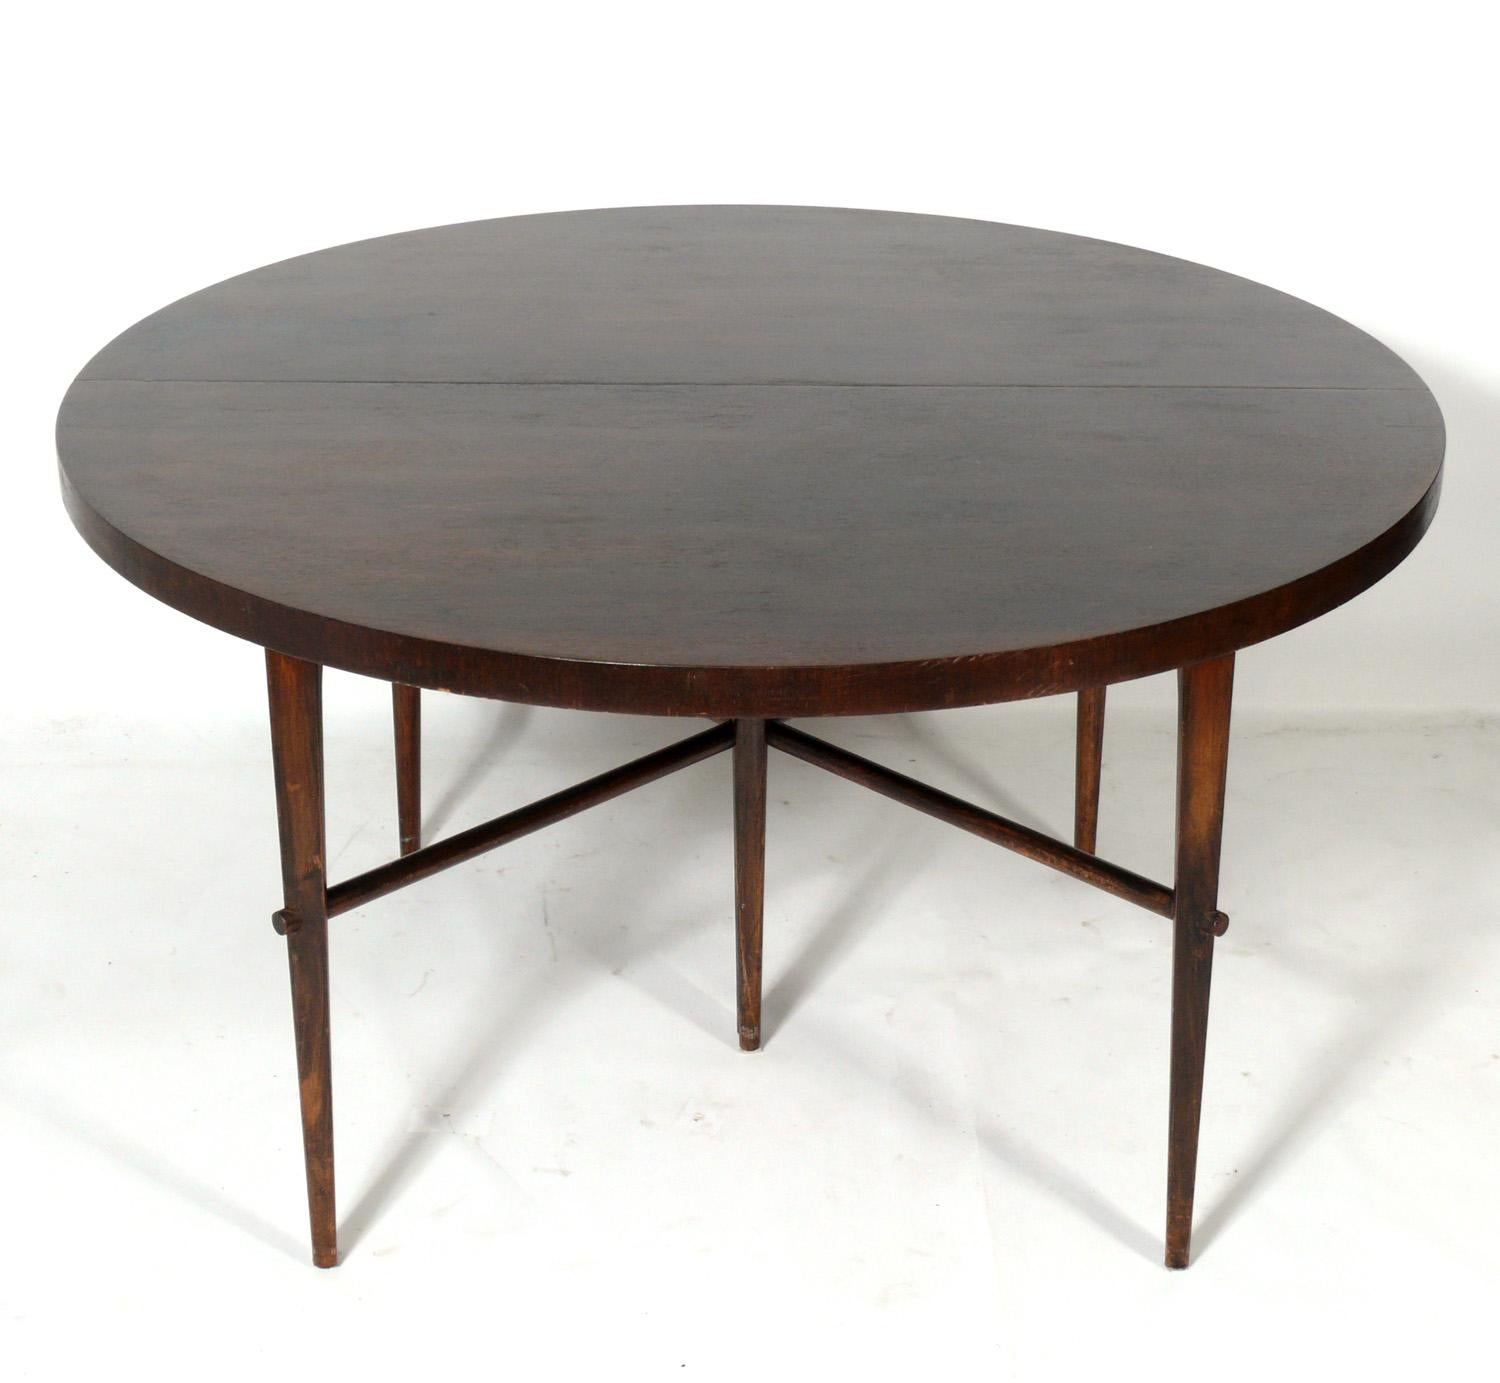 Elegant mid century dining table, designed by Tommi Parzinger, American, circa 1950s. This table is currently being refinished and can be completed in your choice of color. The price noted includes refinishing in your choice of color. It currently